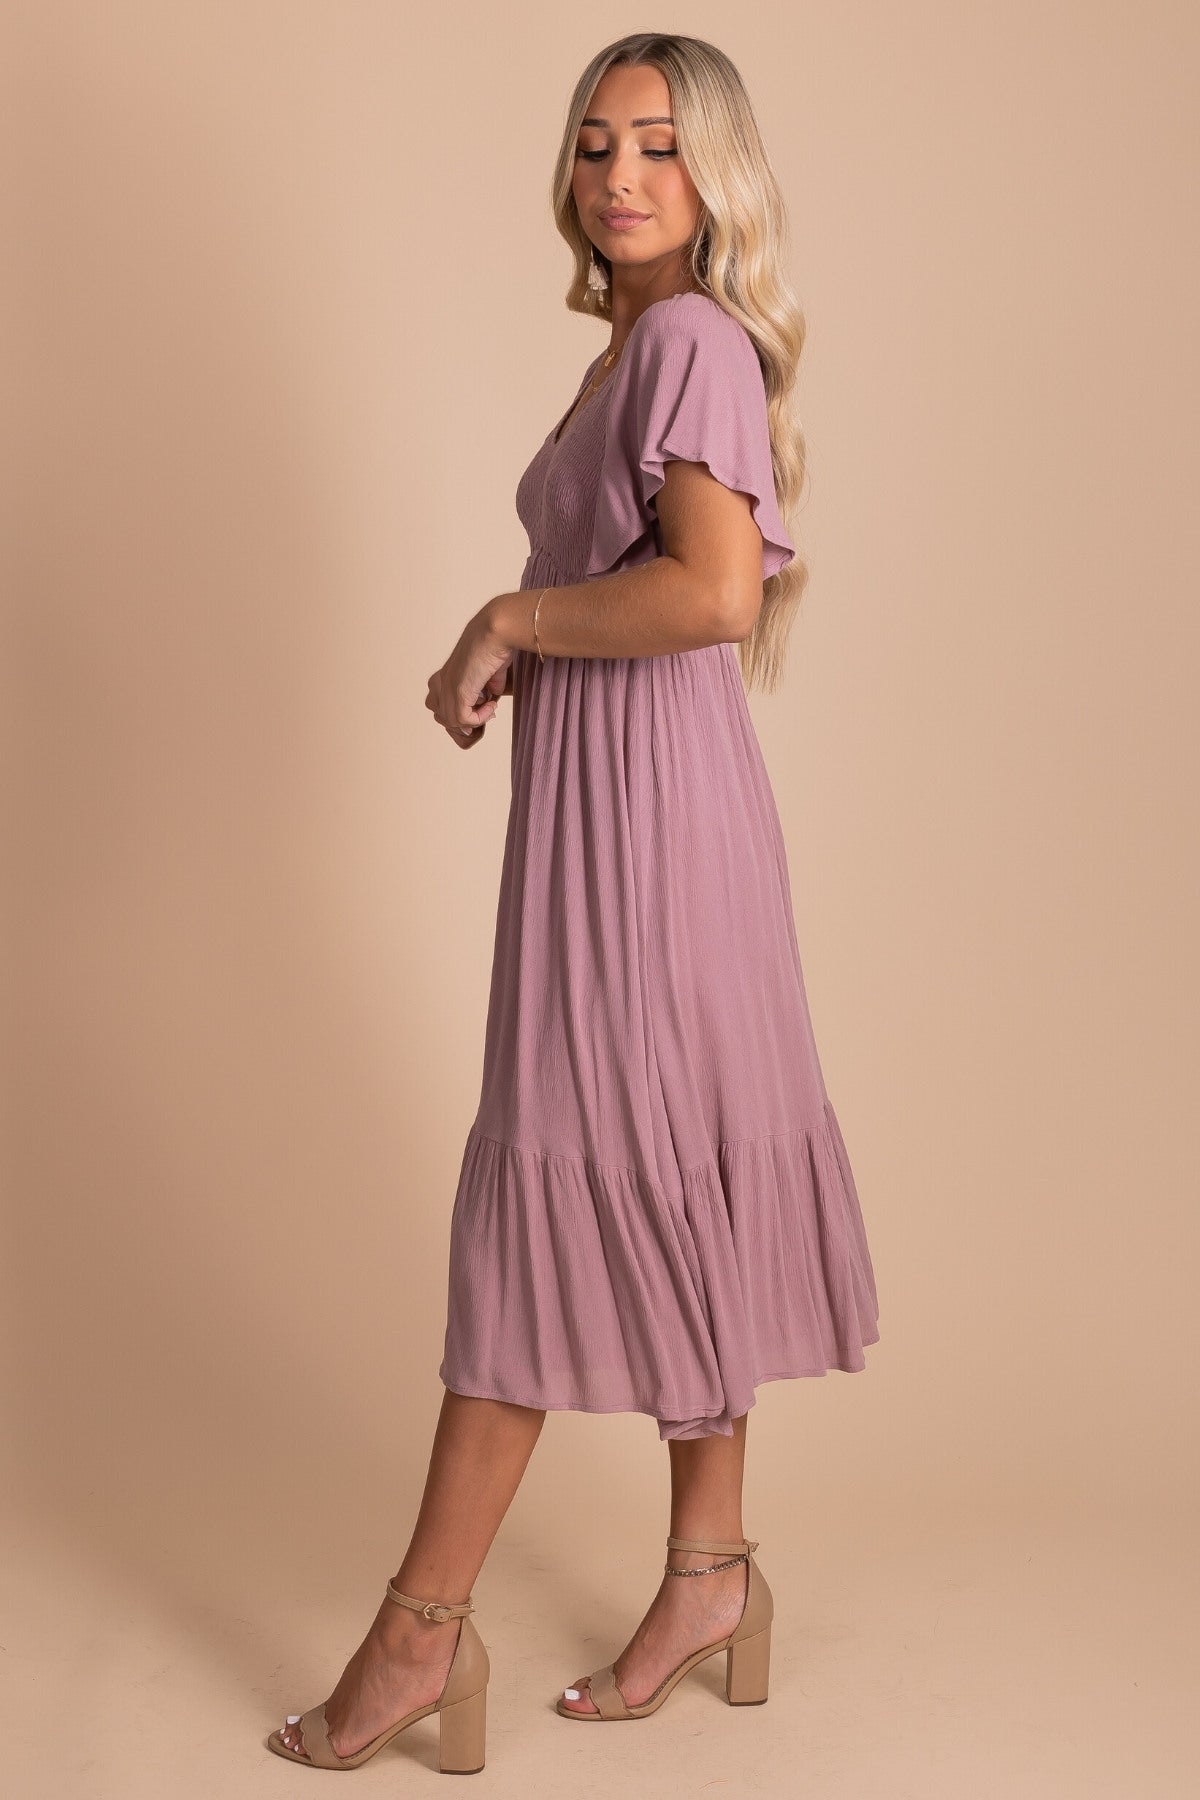 Mauve Purple Midi Dress with Smocked Bodice and Flutter Short Sleeves